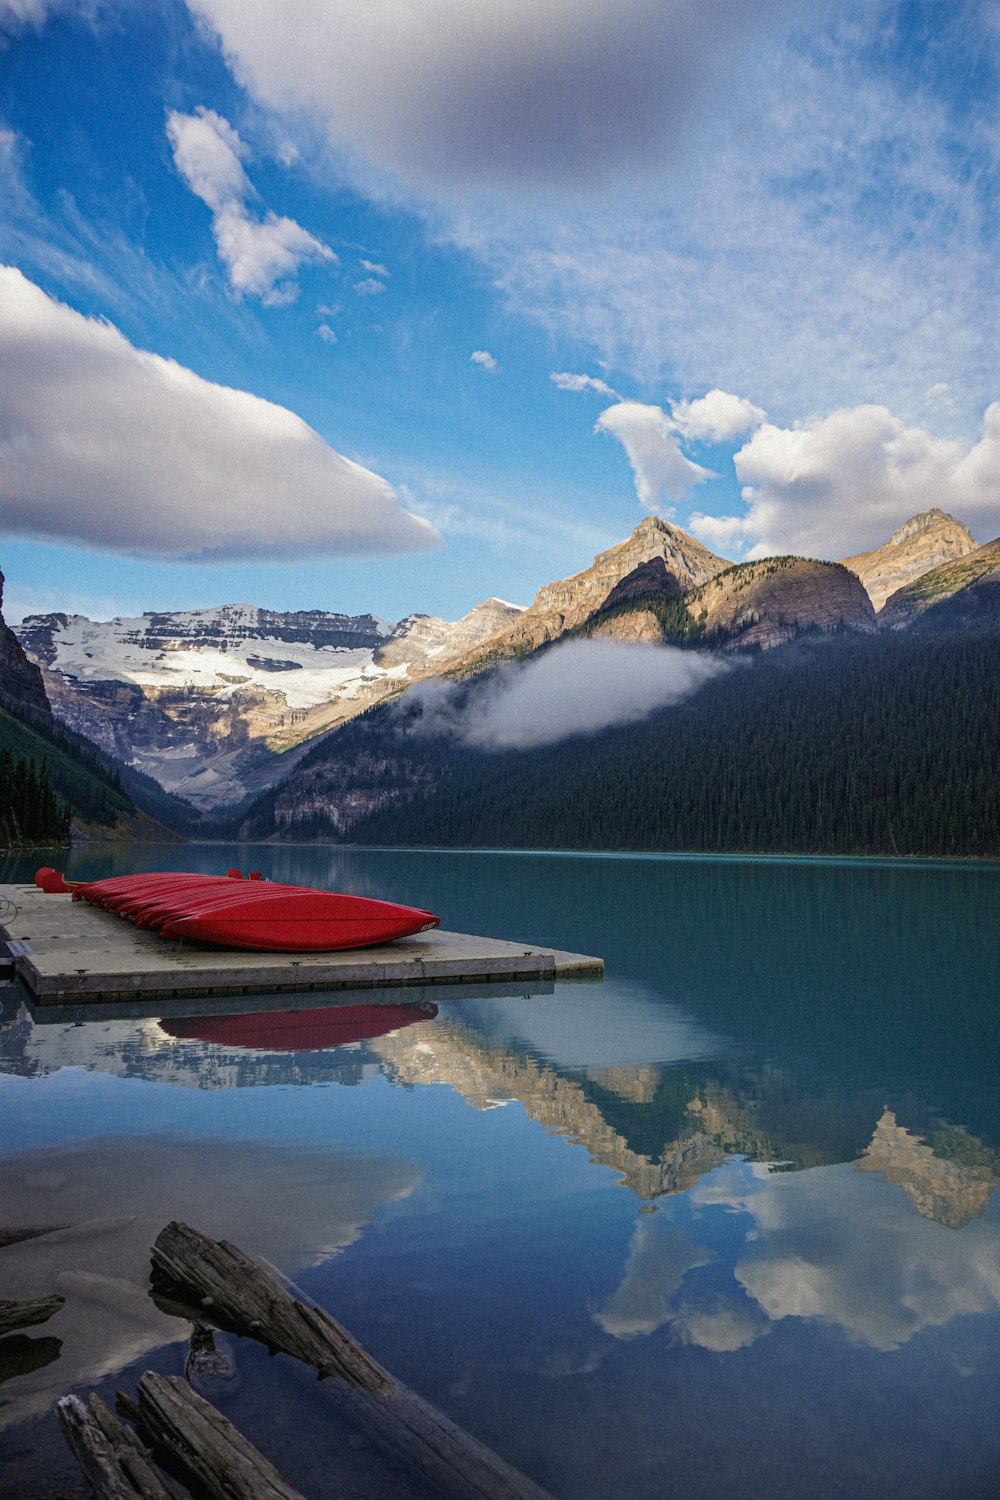 red boat on lake near snow covered mountain under blue sky and white clouds during daytime